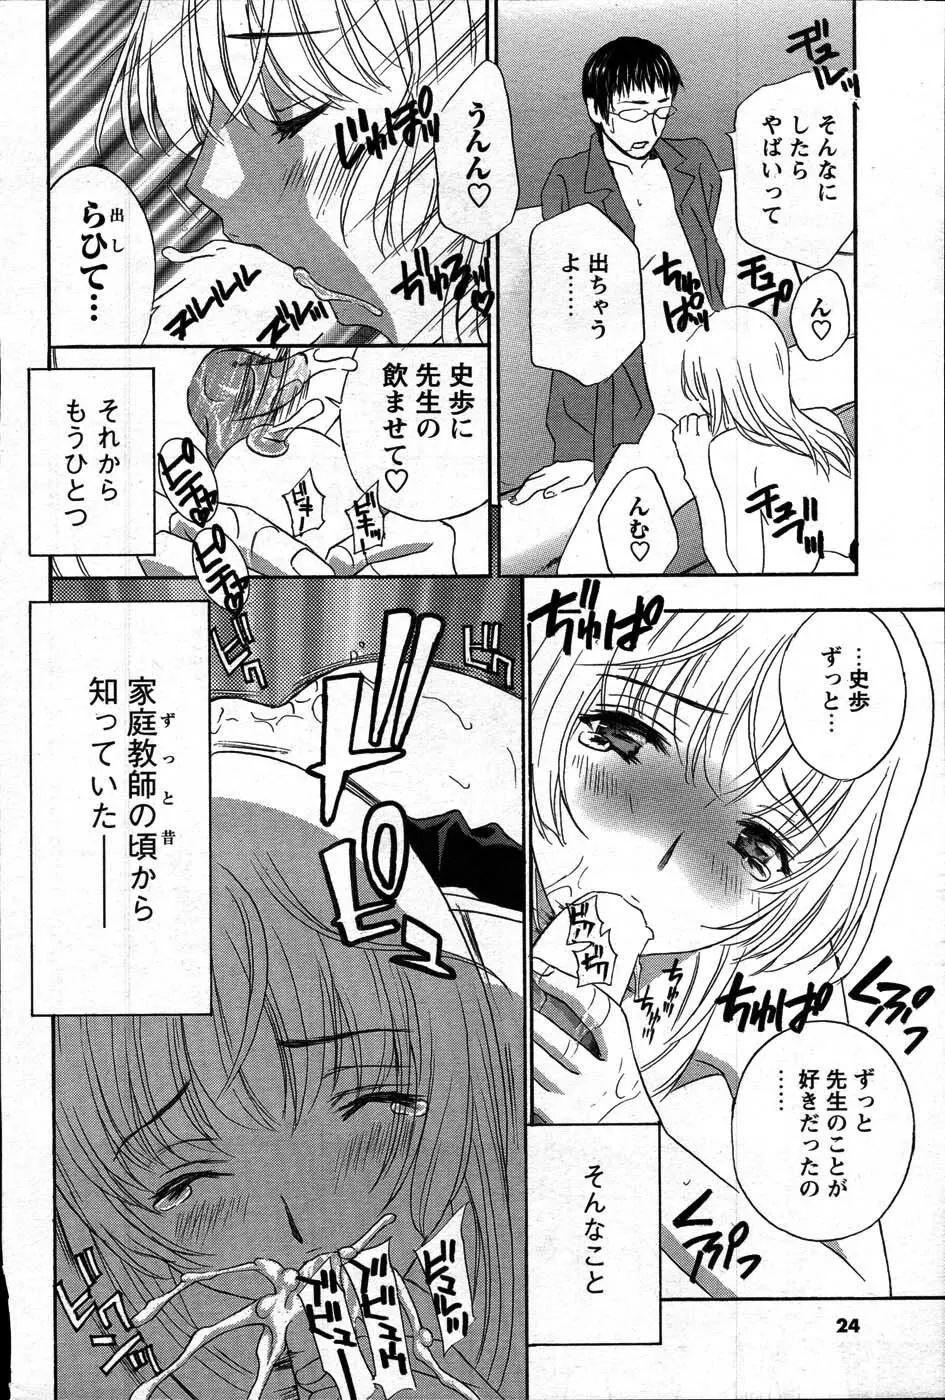 Comic Mens Young Special IKAZUCHI vol. 2 22ページ